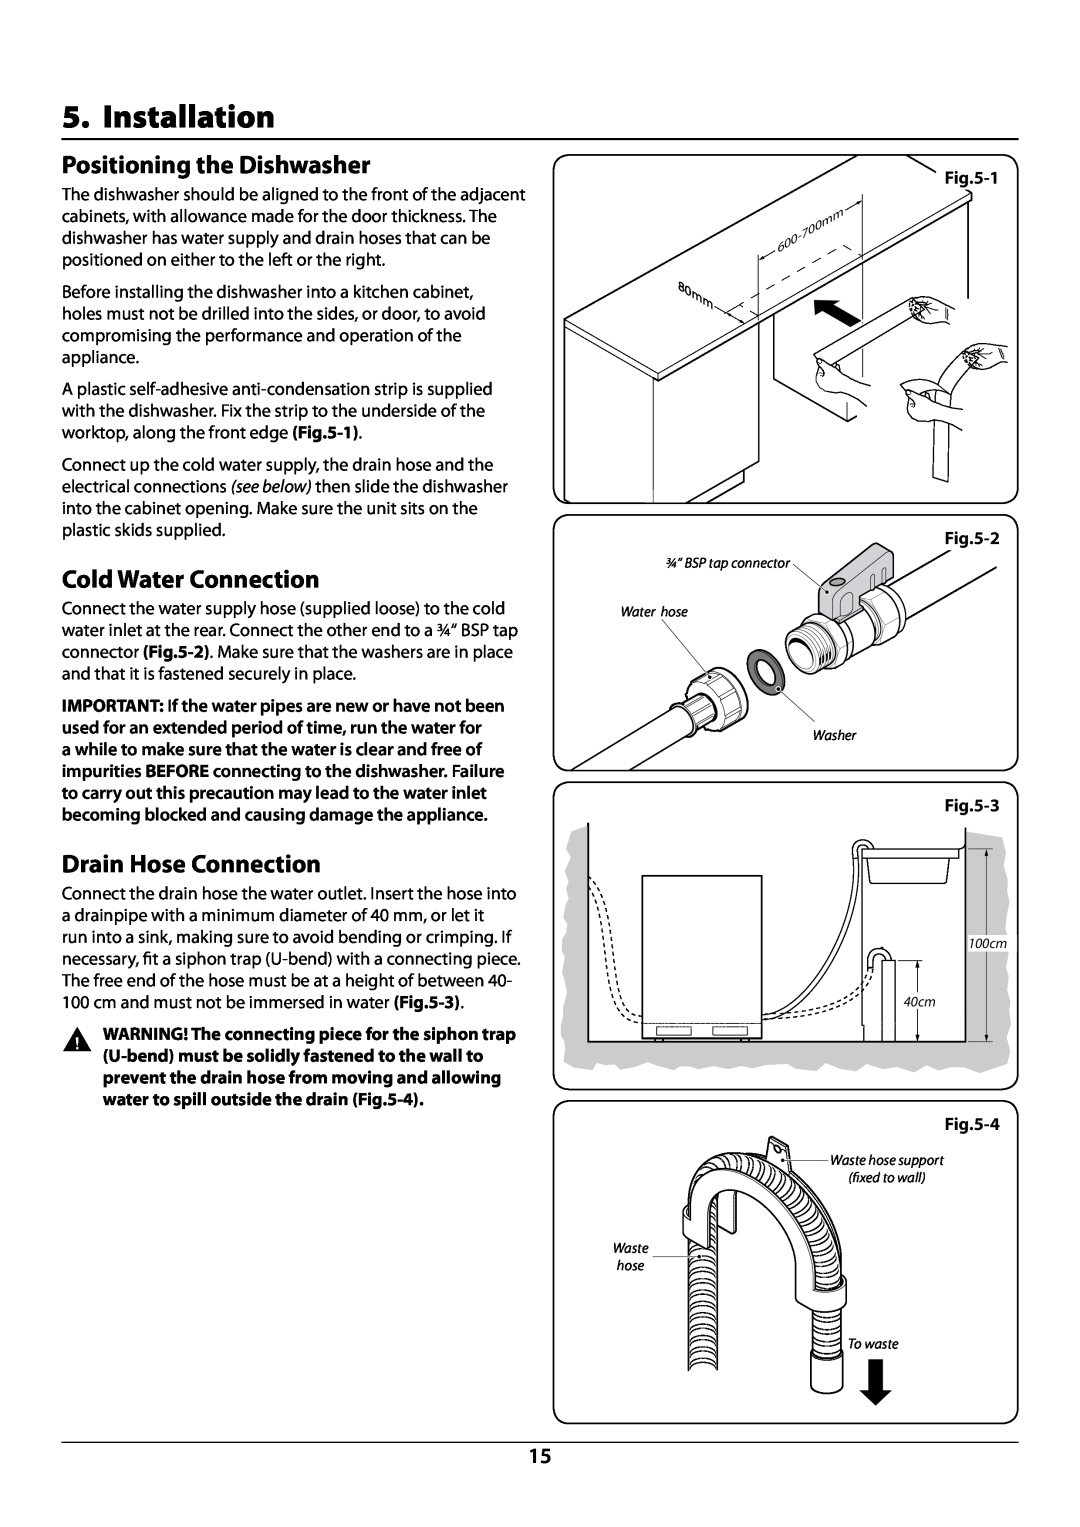 Rangemaster RDW6012FI manual Installation, Positioning the Dishwasher, Cold Water Connection, Drain Hose Connection, 3, 4 